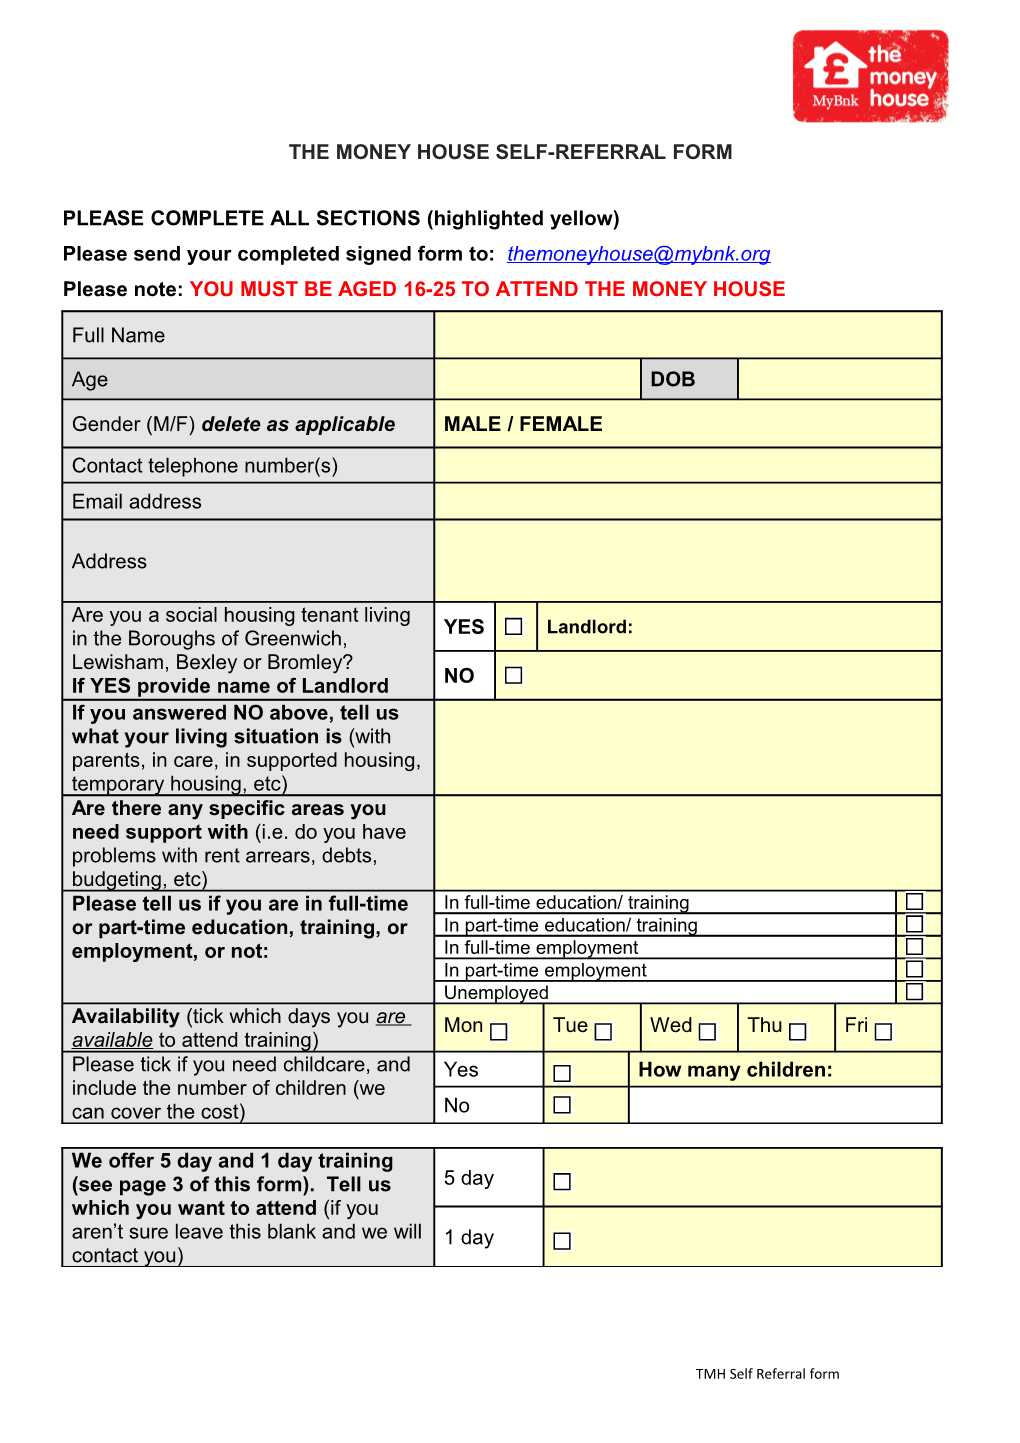 The Money House Self-Referral Form